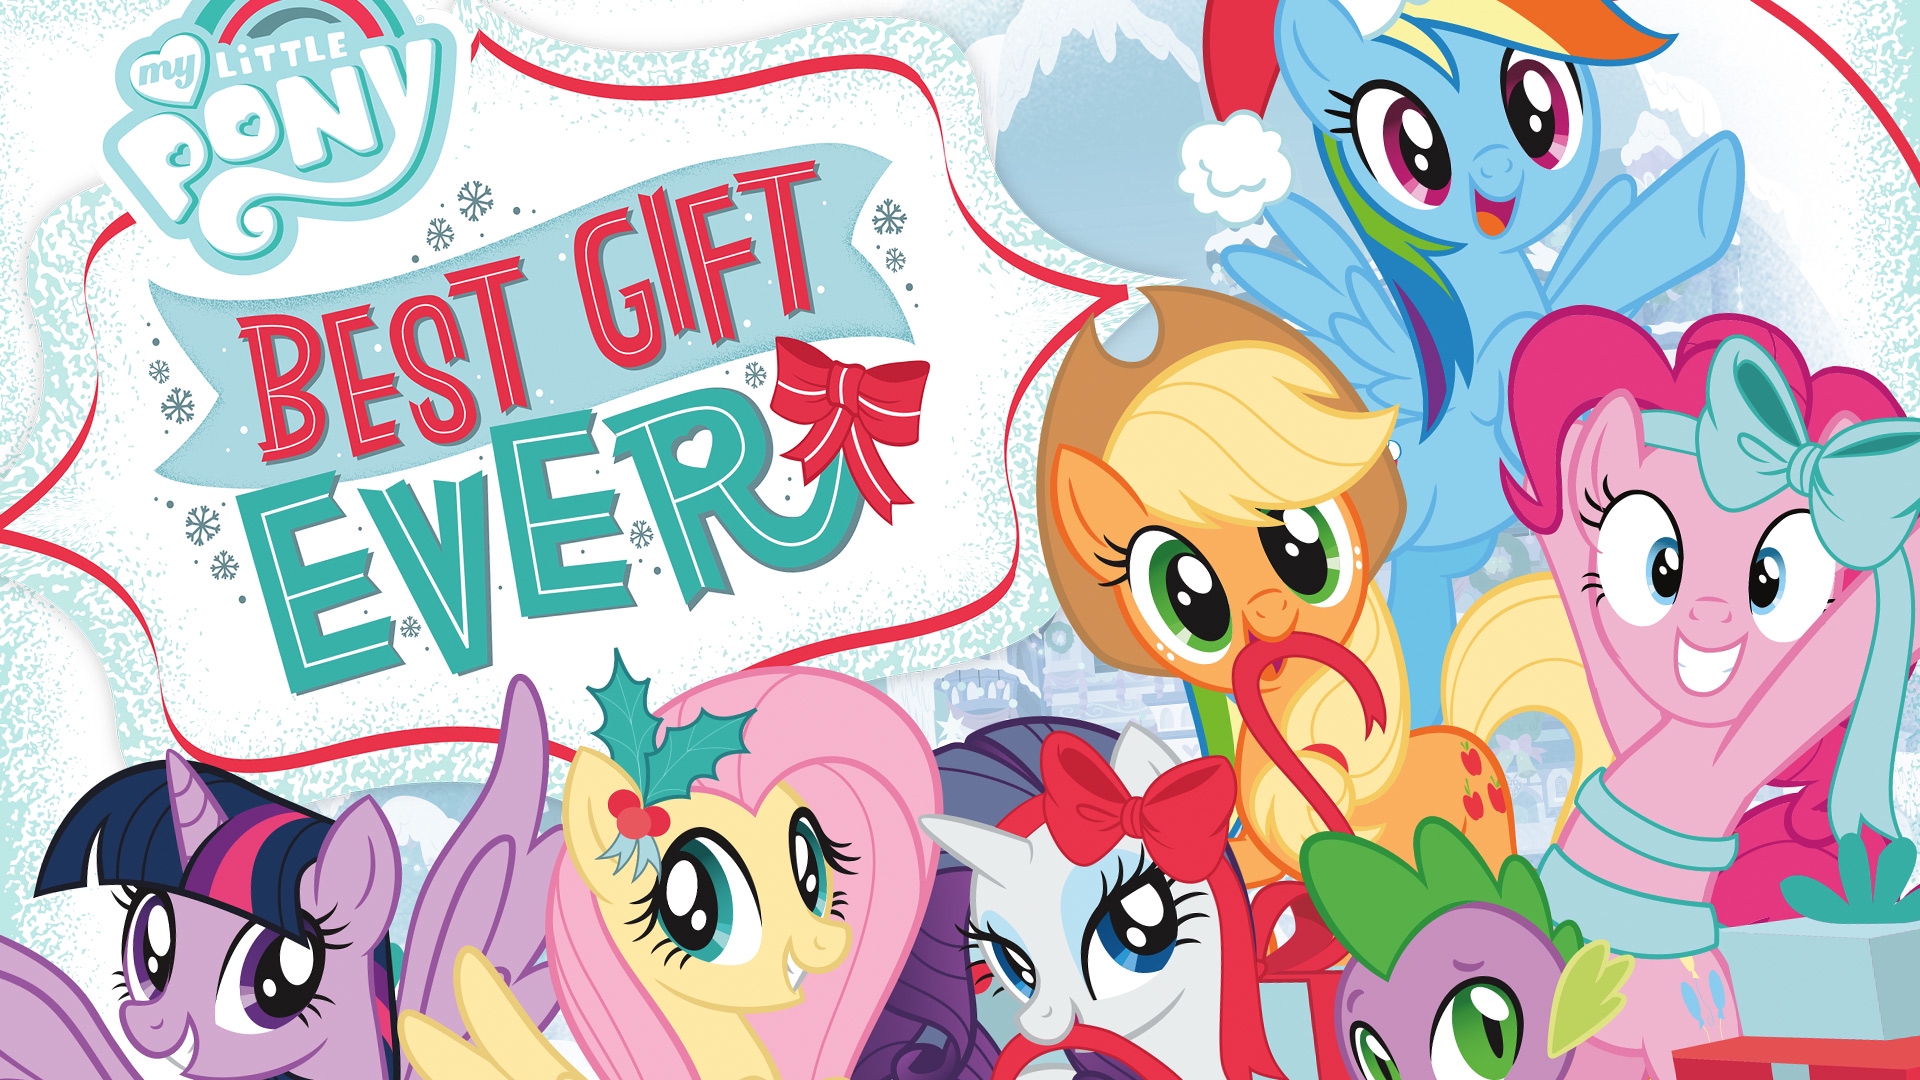 Watch My Little Pony: Friendship Is Magic Streaming Online